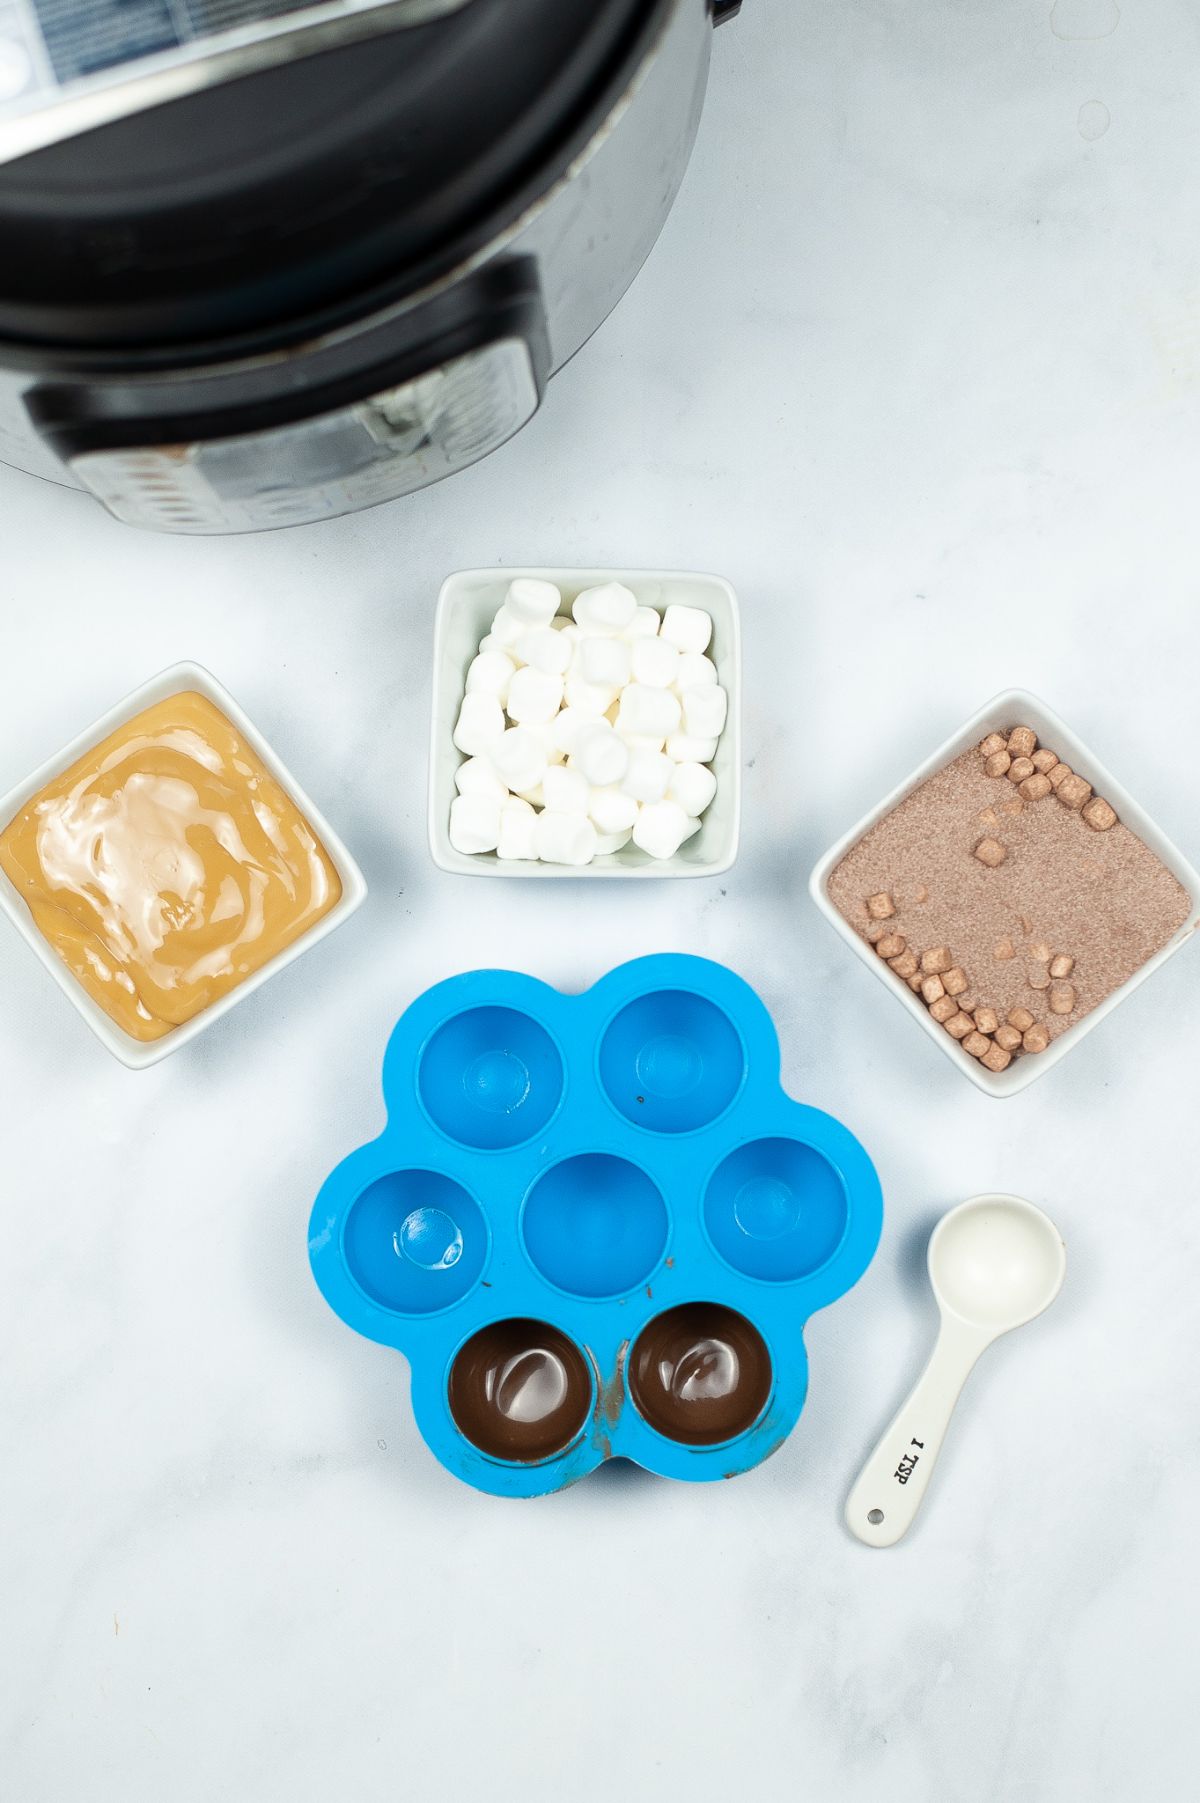 Chocolates in a silicone mold to form the chocolate bomb shell next to caramel sauce, marshmallows, and cocoa mix in white bowls.